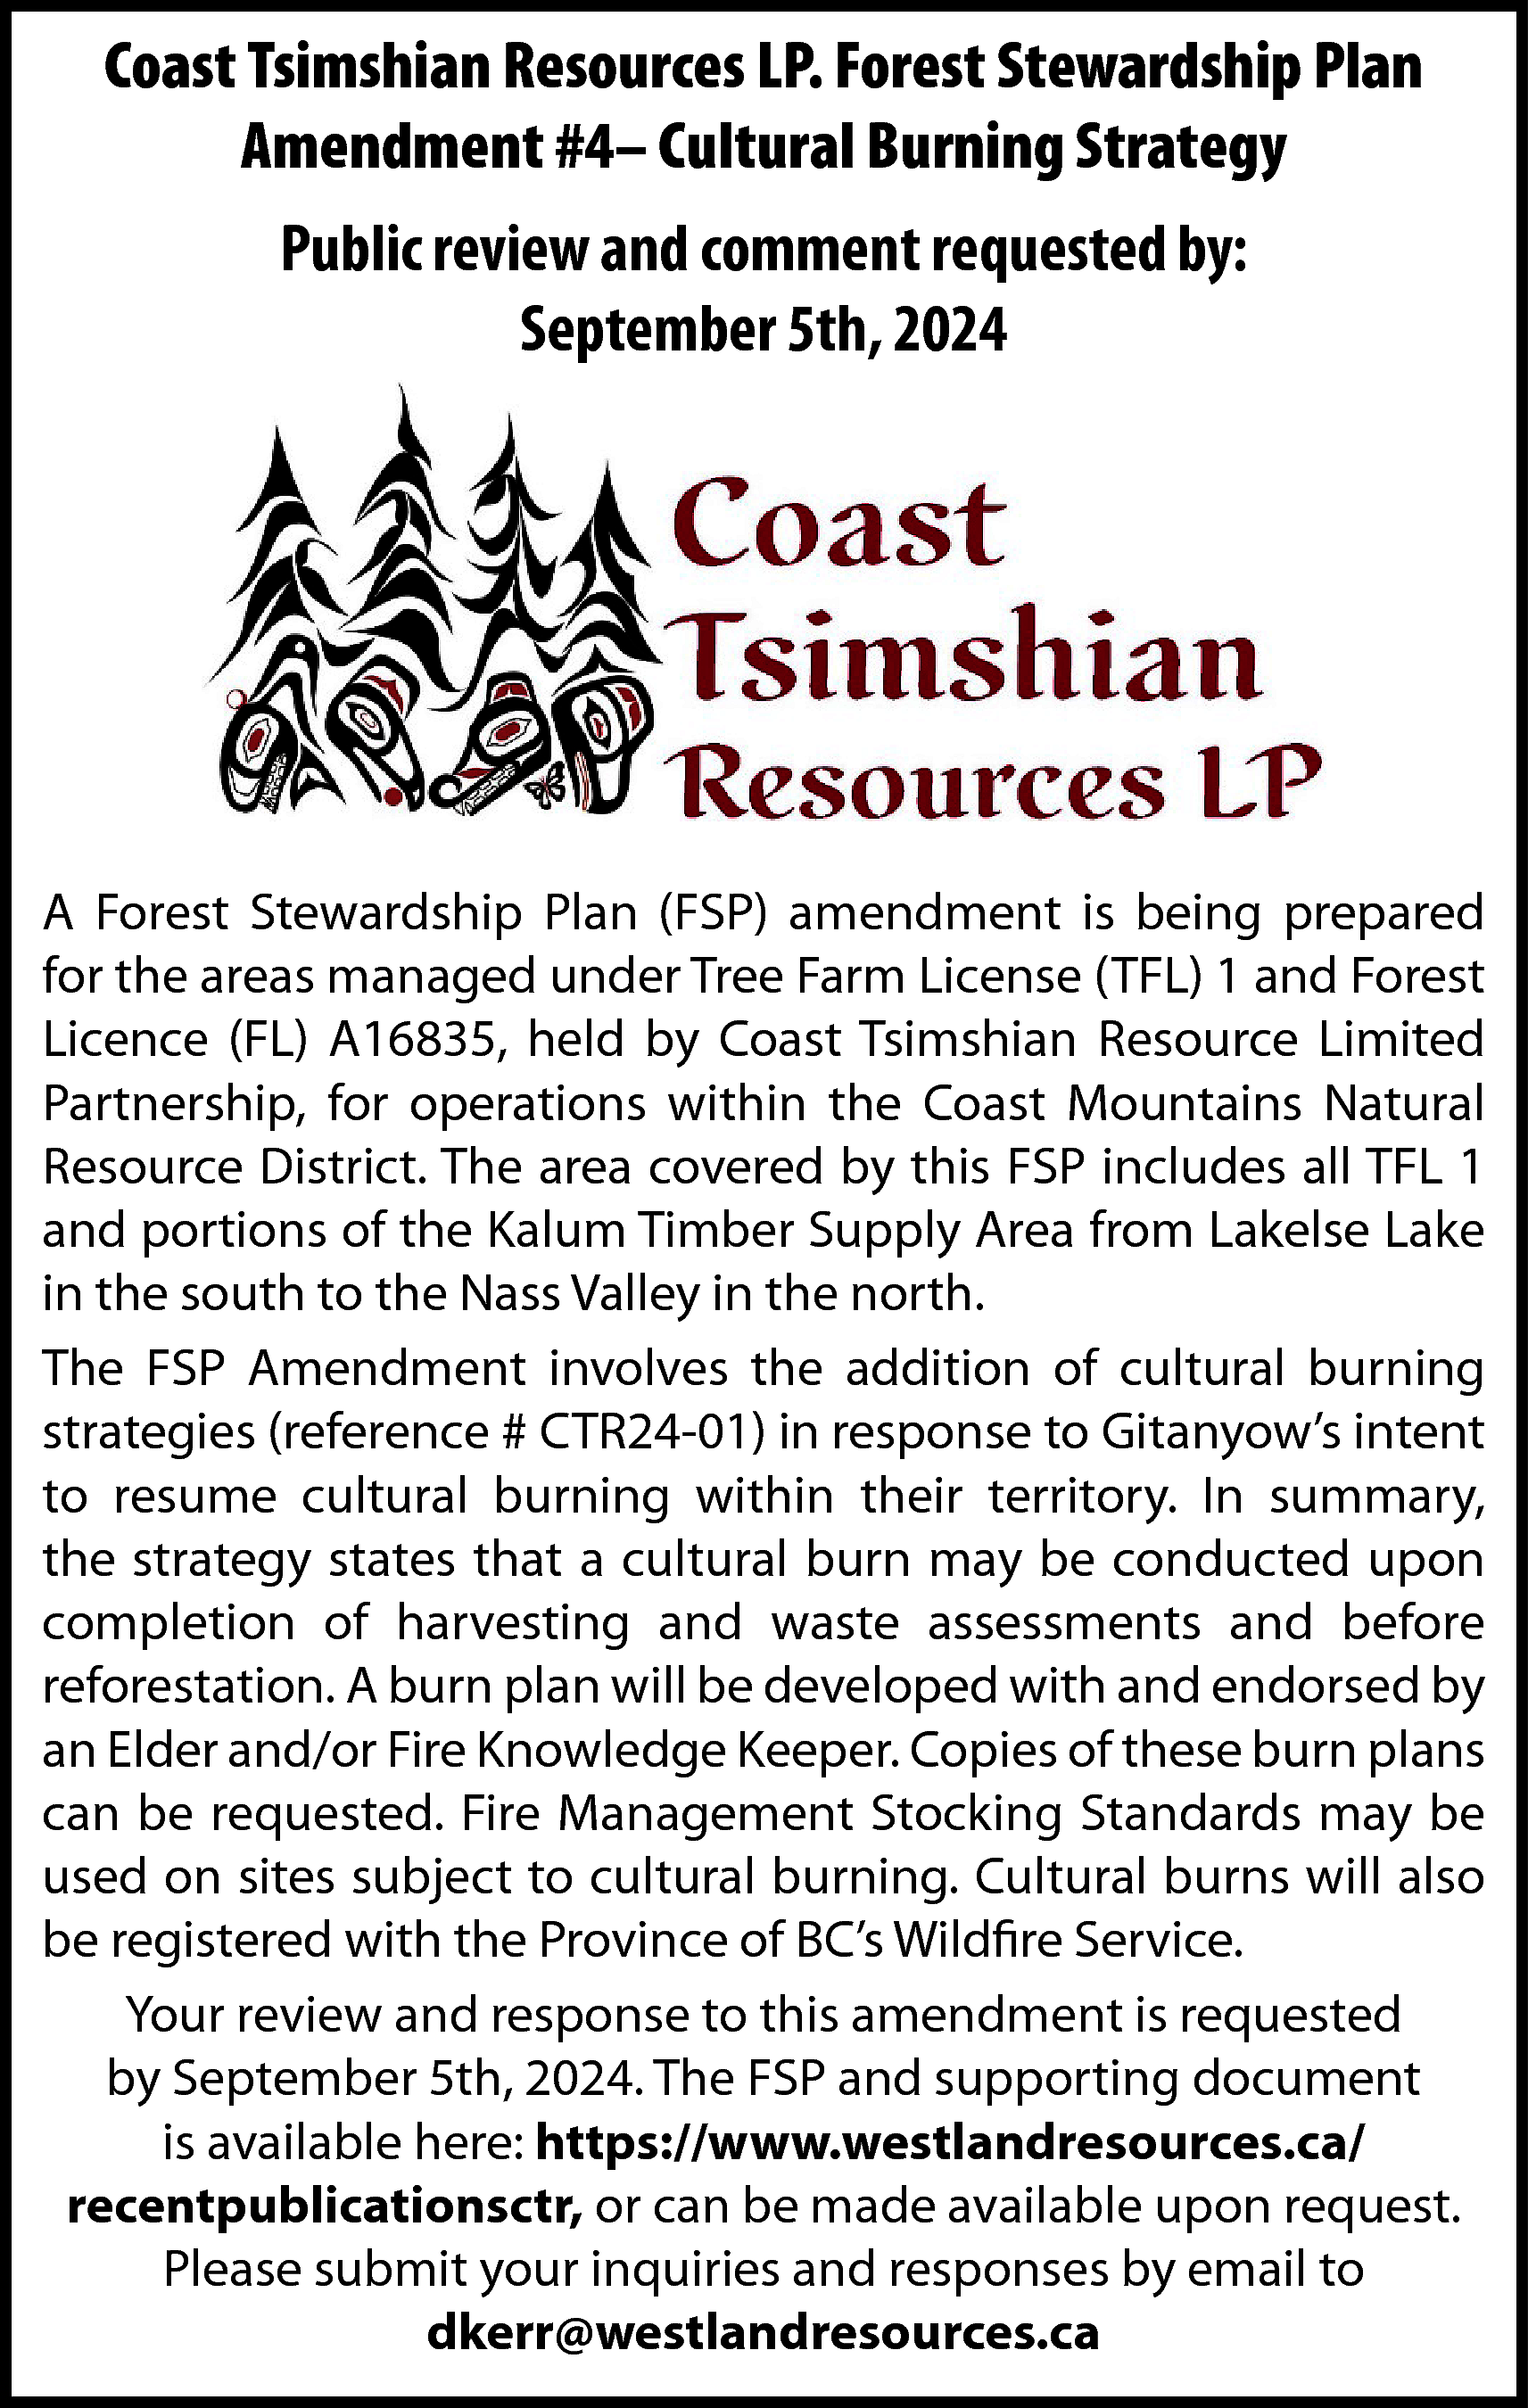 Coast Tsimshian Resources LP. Forest  Coast Tsimshian Resources LP. Forest Stewardship Plan  Amendment #4– Cultural Burning Strategy  Public review and comment requested by:  September 5th, 2024    A Forest Stewardship Plan (FSP) amendment is being prepared  for the areas managed under Tree Farm License (TFL) 1 and Forest  Licence (FL) A16835, held by Coast Tsimshian Resource Limited  Partnership, for operations within the Coast Mountains Natural  Resource District. The area covered by this FSP includes all TFL 1  and portions of the Kalum Timber Supply Area from Lakelse Lake  in the south to the Nass Valley in the north.  The FSP Amendment involves the addition of cultural burning  strategies (reference # CTR24-01) in response to Gitanyow’s intent  to resume cultural burning within their territory. In summary,  the strategy states that a cultural burn may be conducted upon  completion of harvesting and waste assessments and before  reforestation. A burn plan will be developed with and endorsed by  an Elder and/or Fire Knowledge Keeper. Copies of these burn plans  can be requested. Fire Management Stocking Standards may be  used on sites subject to cultural burning. Cultural burns will also  be registered with the Province of BC’s Wildfire Service.  Your review and response to this amendment is requested  by September 5th, 2024. The FSP and supporting document  is available here: https://www.westlandresources.ca/  recentpublicationsctr, or can be made available upon request.  Please submit your inquiries and responses by email to  dkerr@westlandresources.ca    